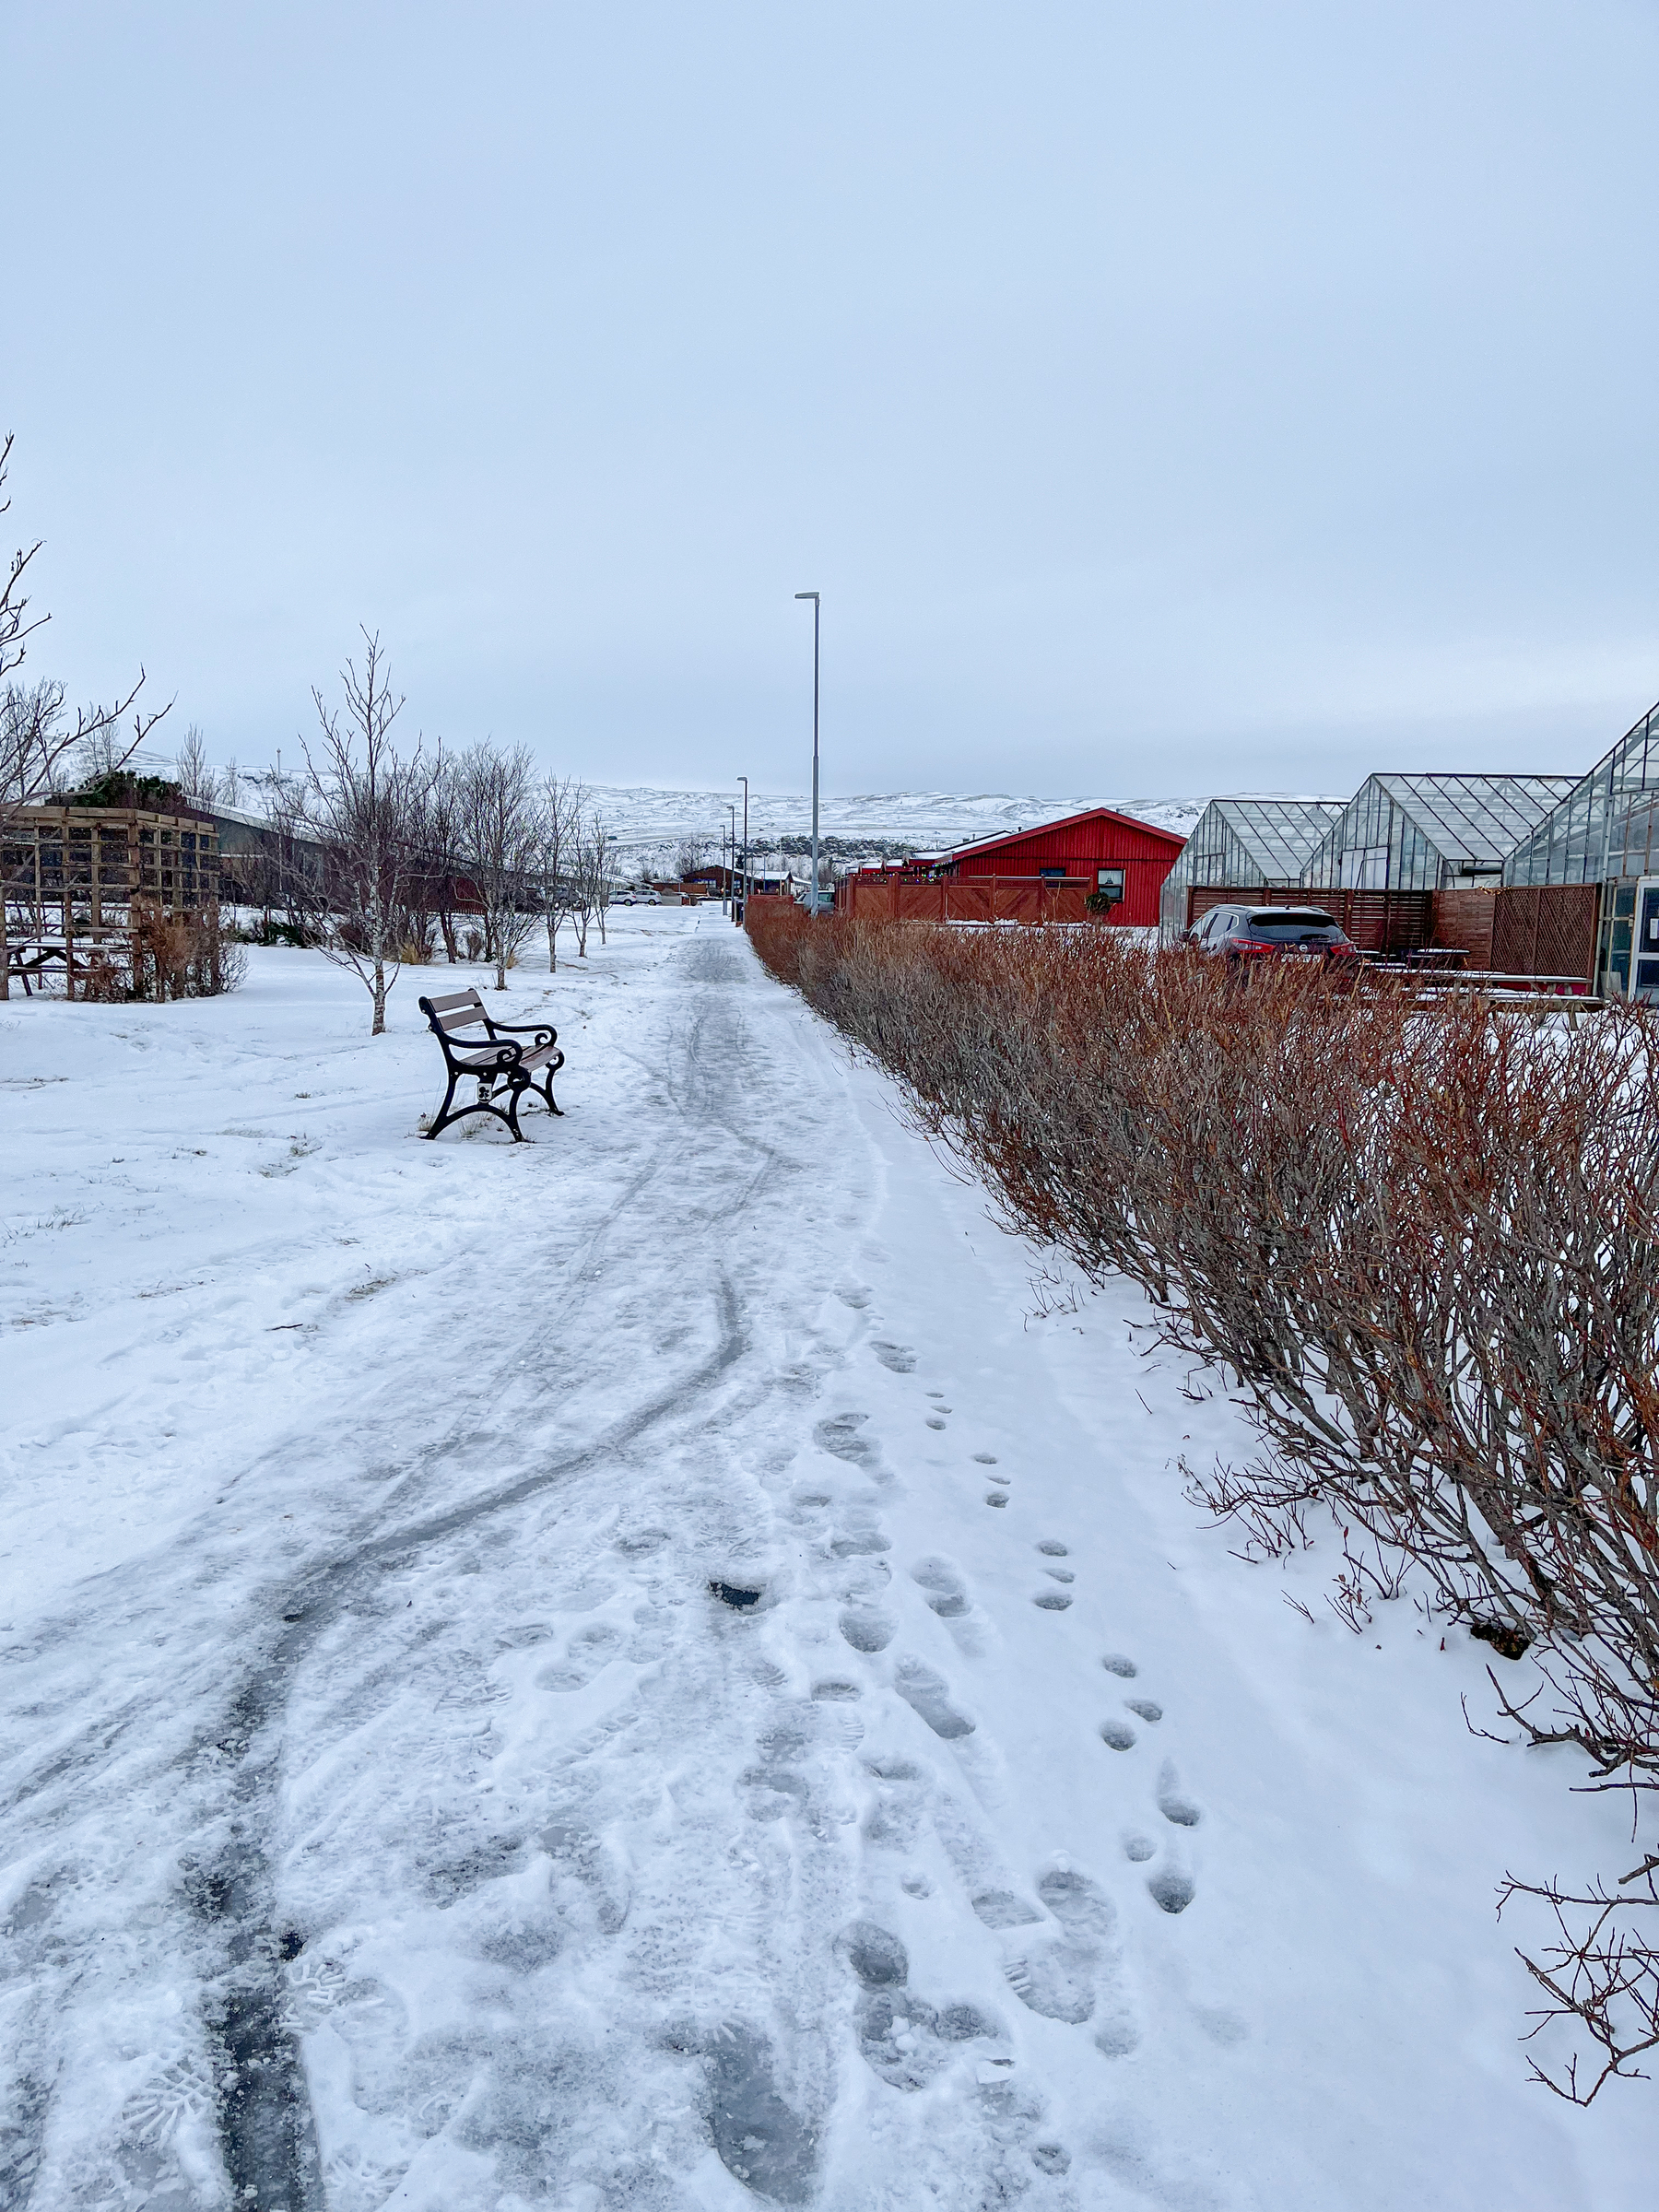 One of the paths in Hveragerði. Past a bench. In snow. 